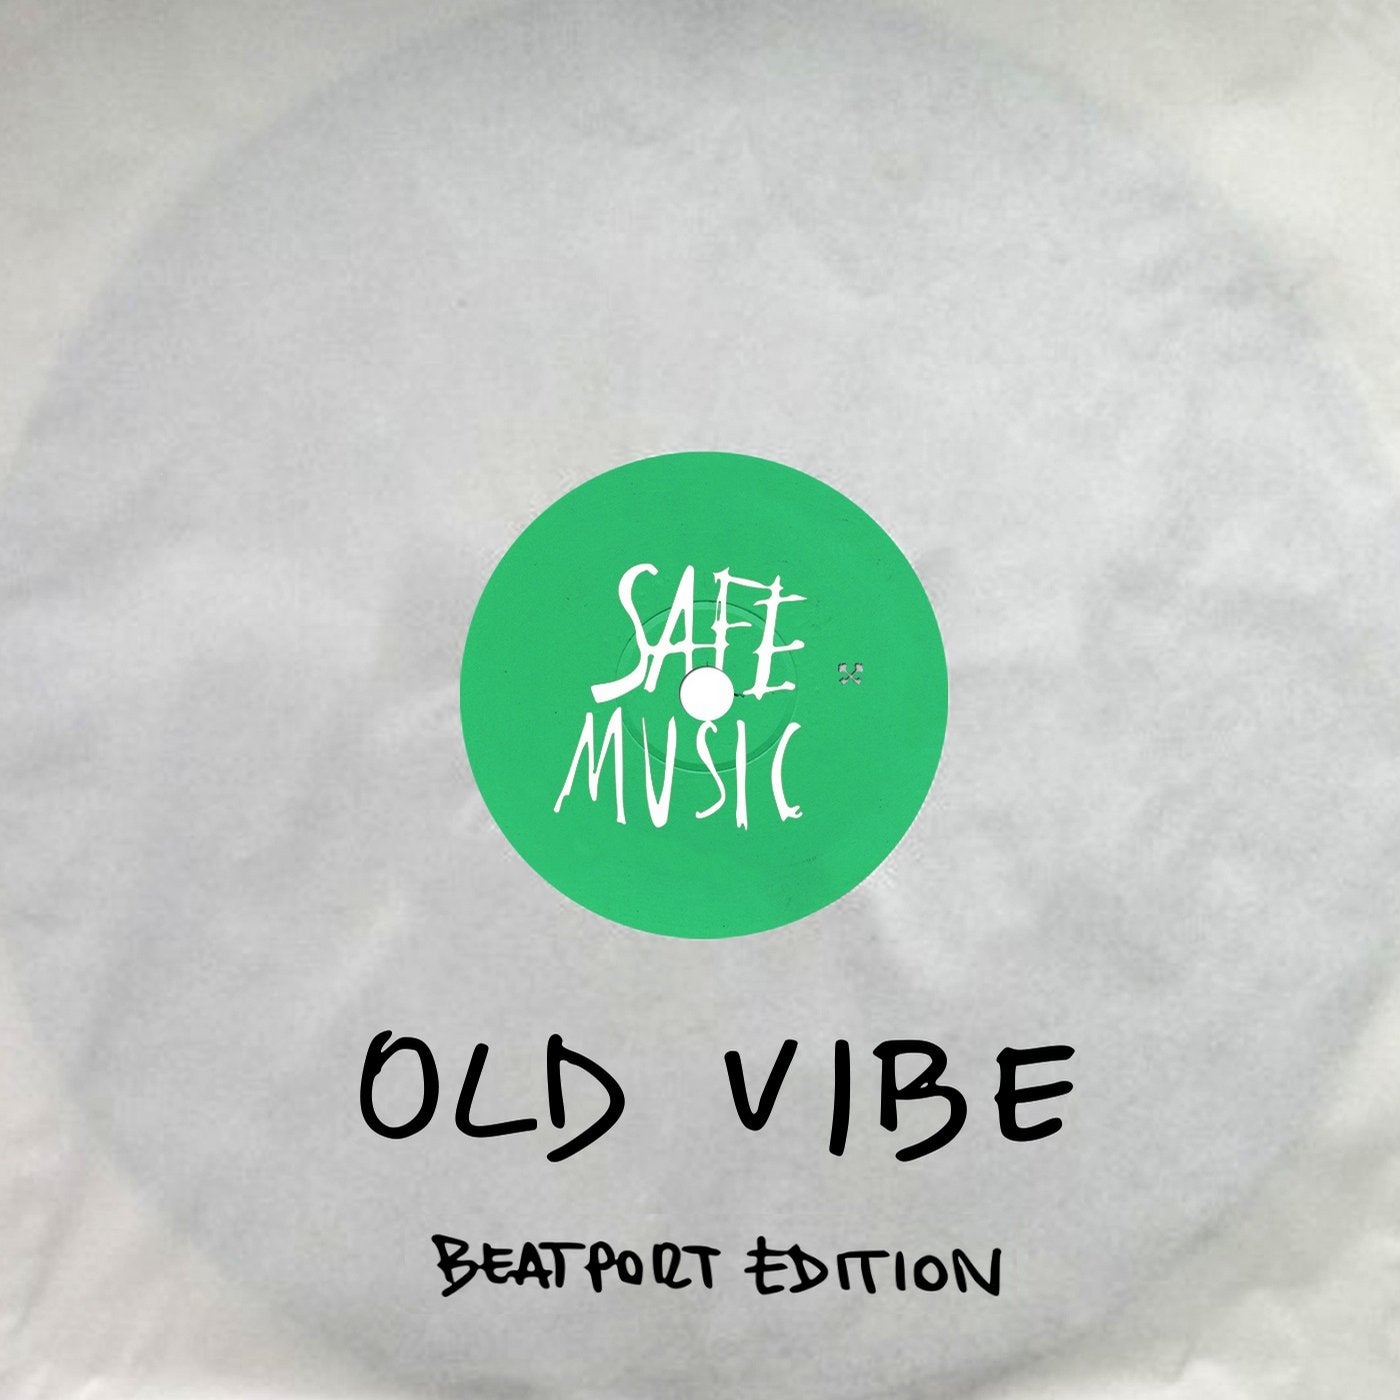 OLD VIBE - Beatport Edition